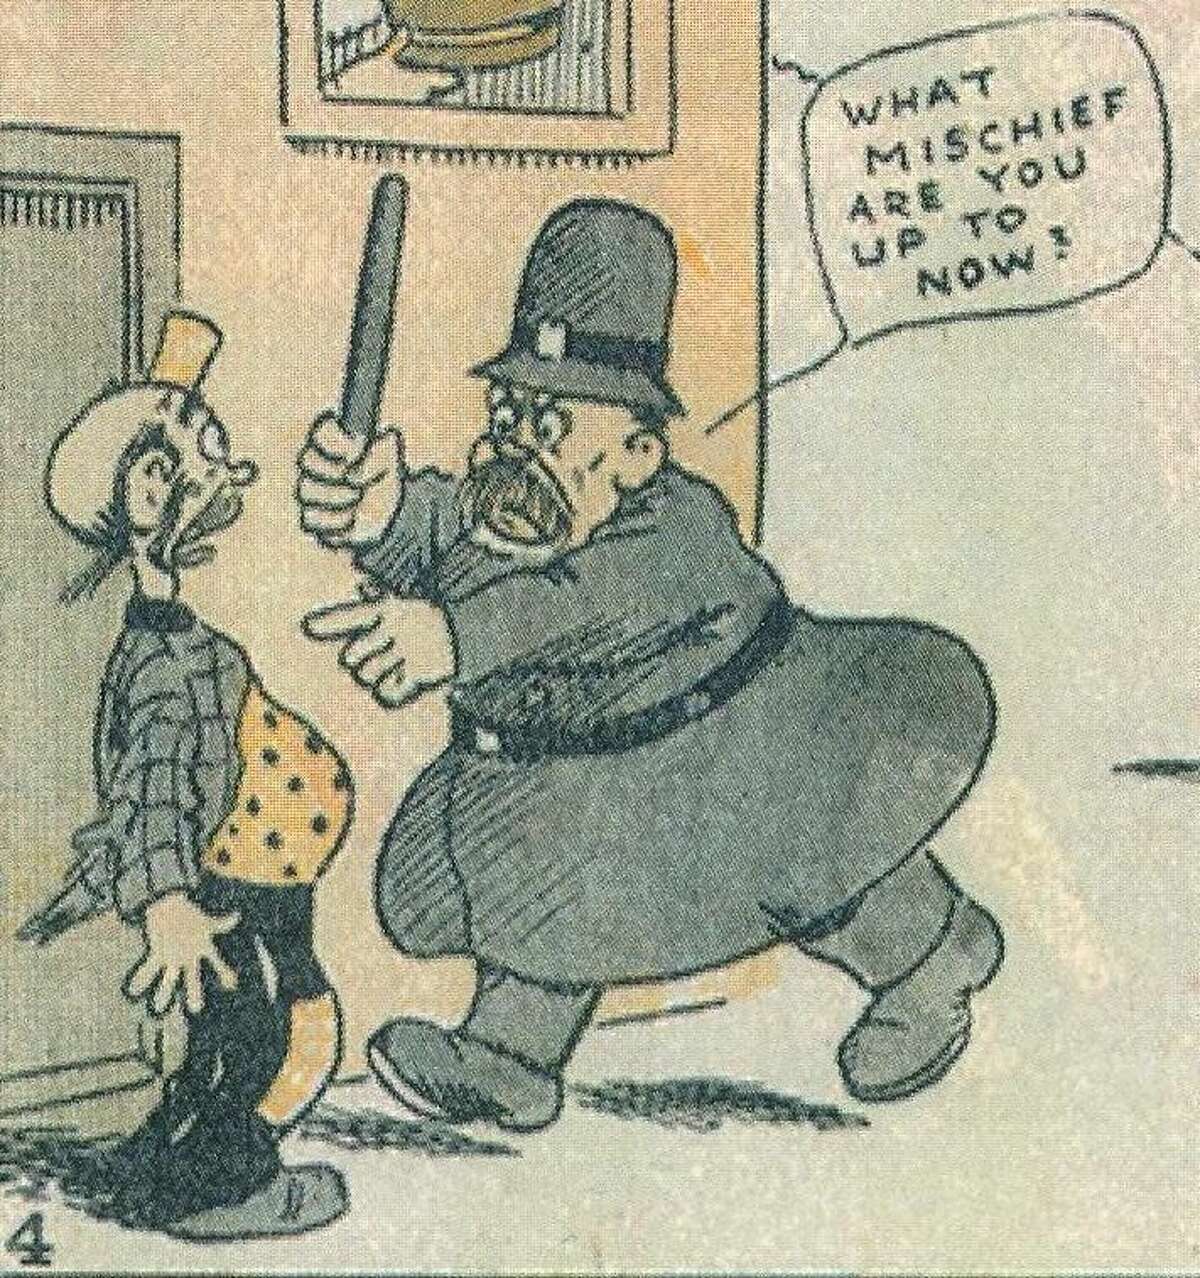 An old cartoon depicting an Irish-American stereotype of an earlier time from "The Irish and the Origins of American Popular Culture," a new book by University of New Haven Associate Professor of English Christopher Dowd. The book traces the historical confluence the unprecedented Irish immigration of the late 1800s and early 1900s and the birth of American popular culture -- and looks at how perceptions of Irish Americans changed.